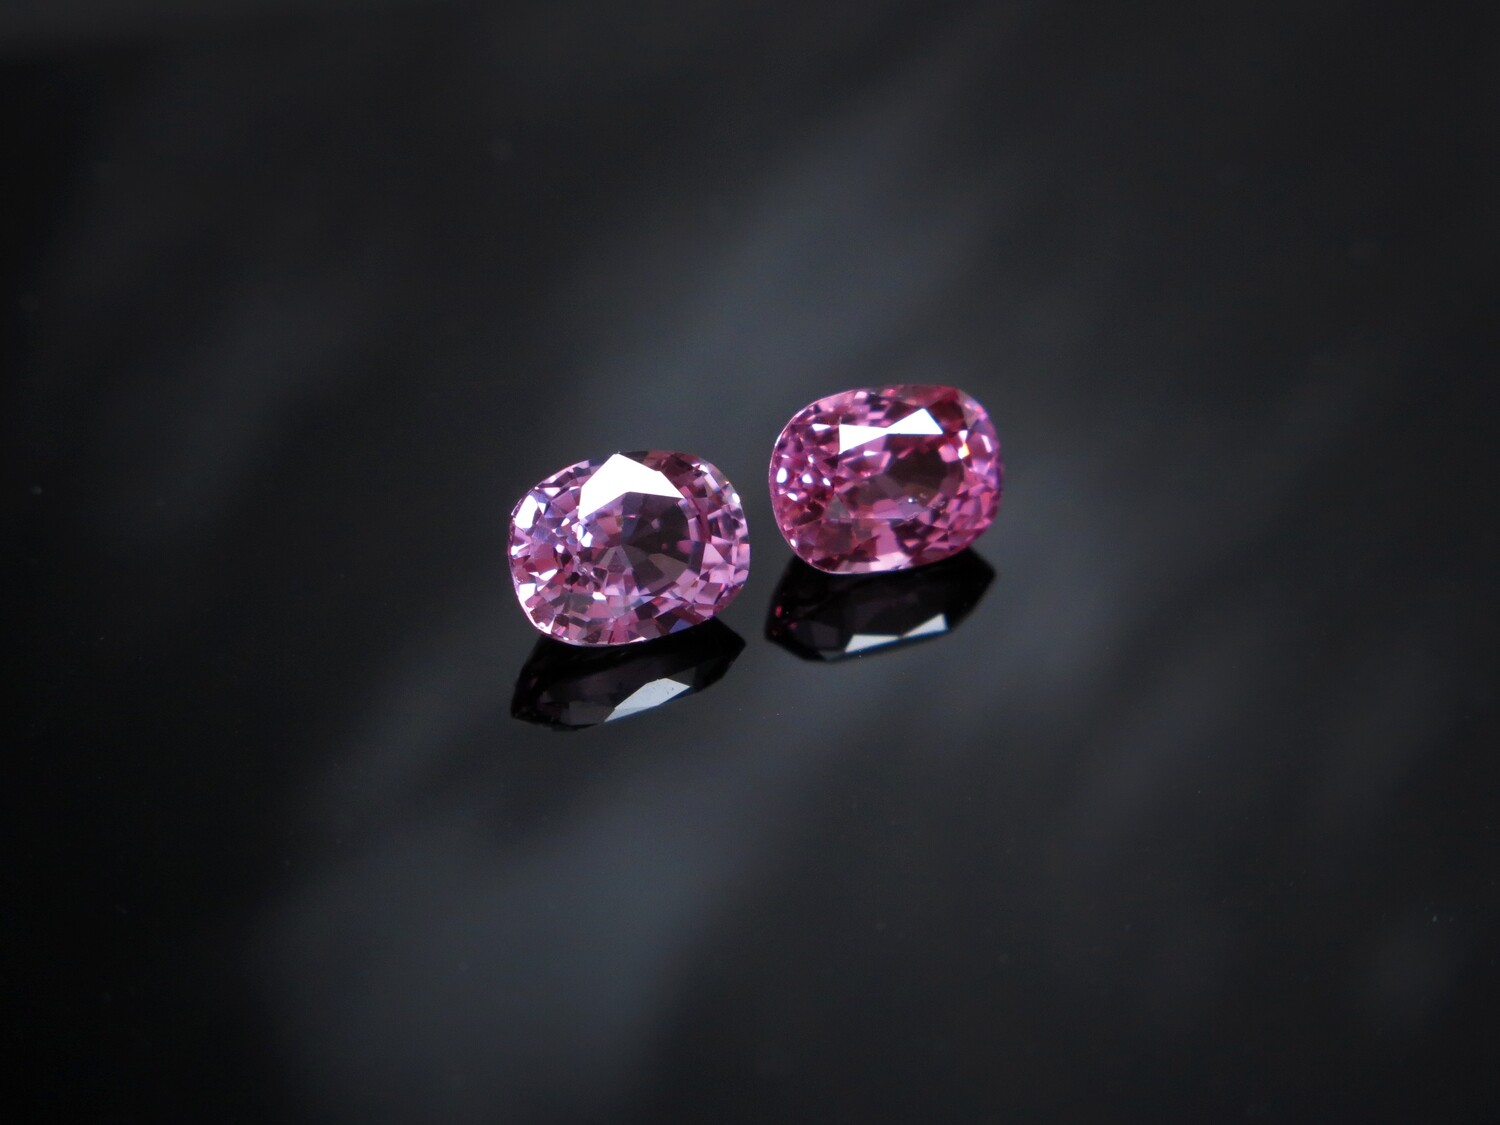 Spinel Cushion cut pair 0.94 ct and 0.96 ct